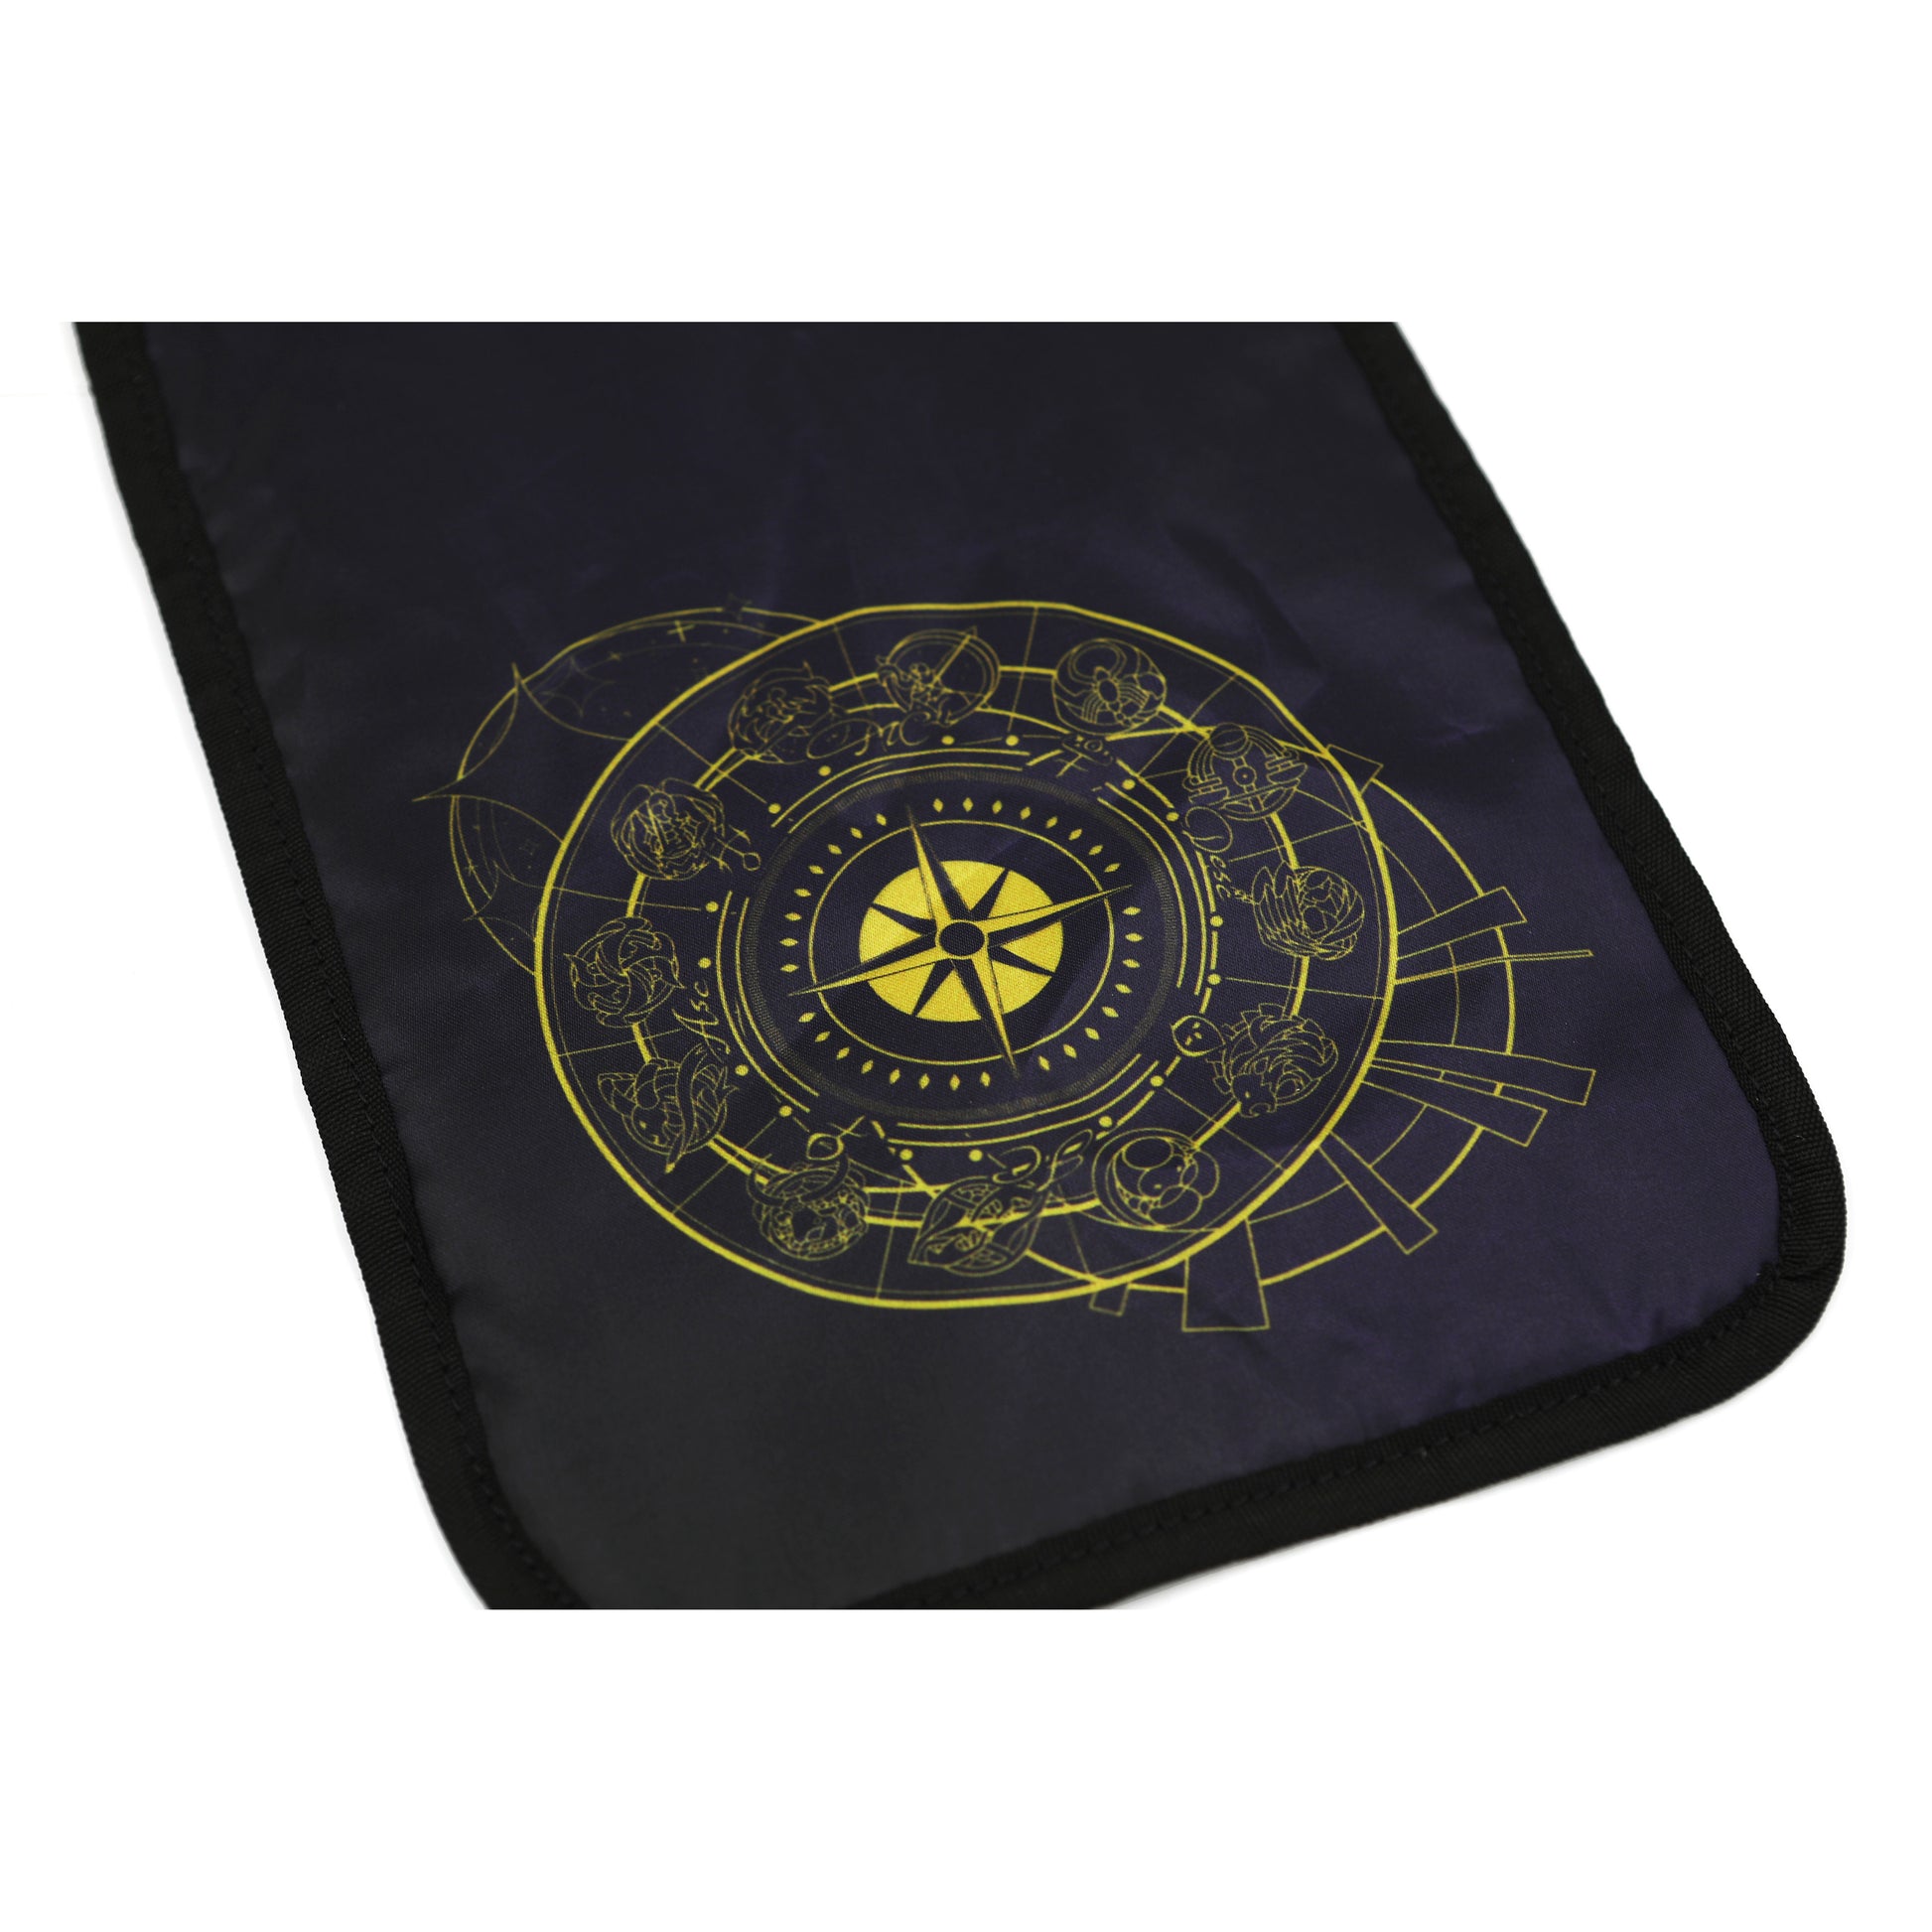 Zodiac insert on white background. The bag lining is a very deep purple and features a gold compass rose with zodiac symbos in all directions.